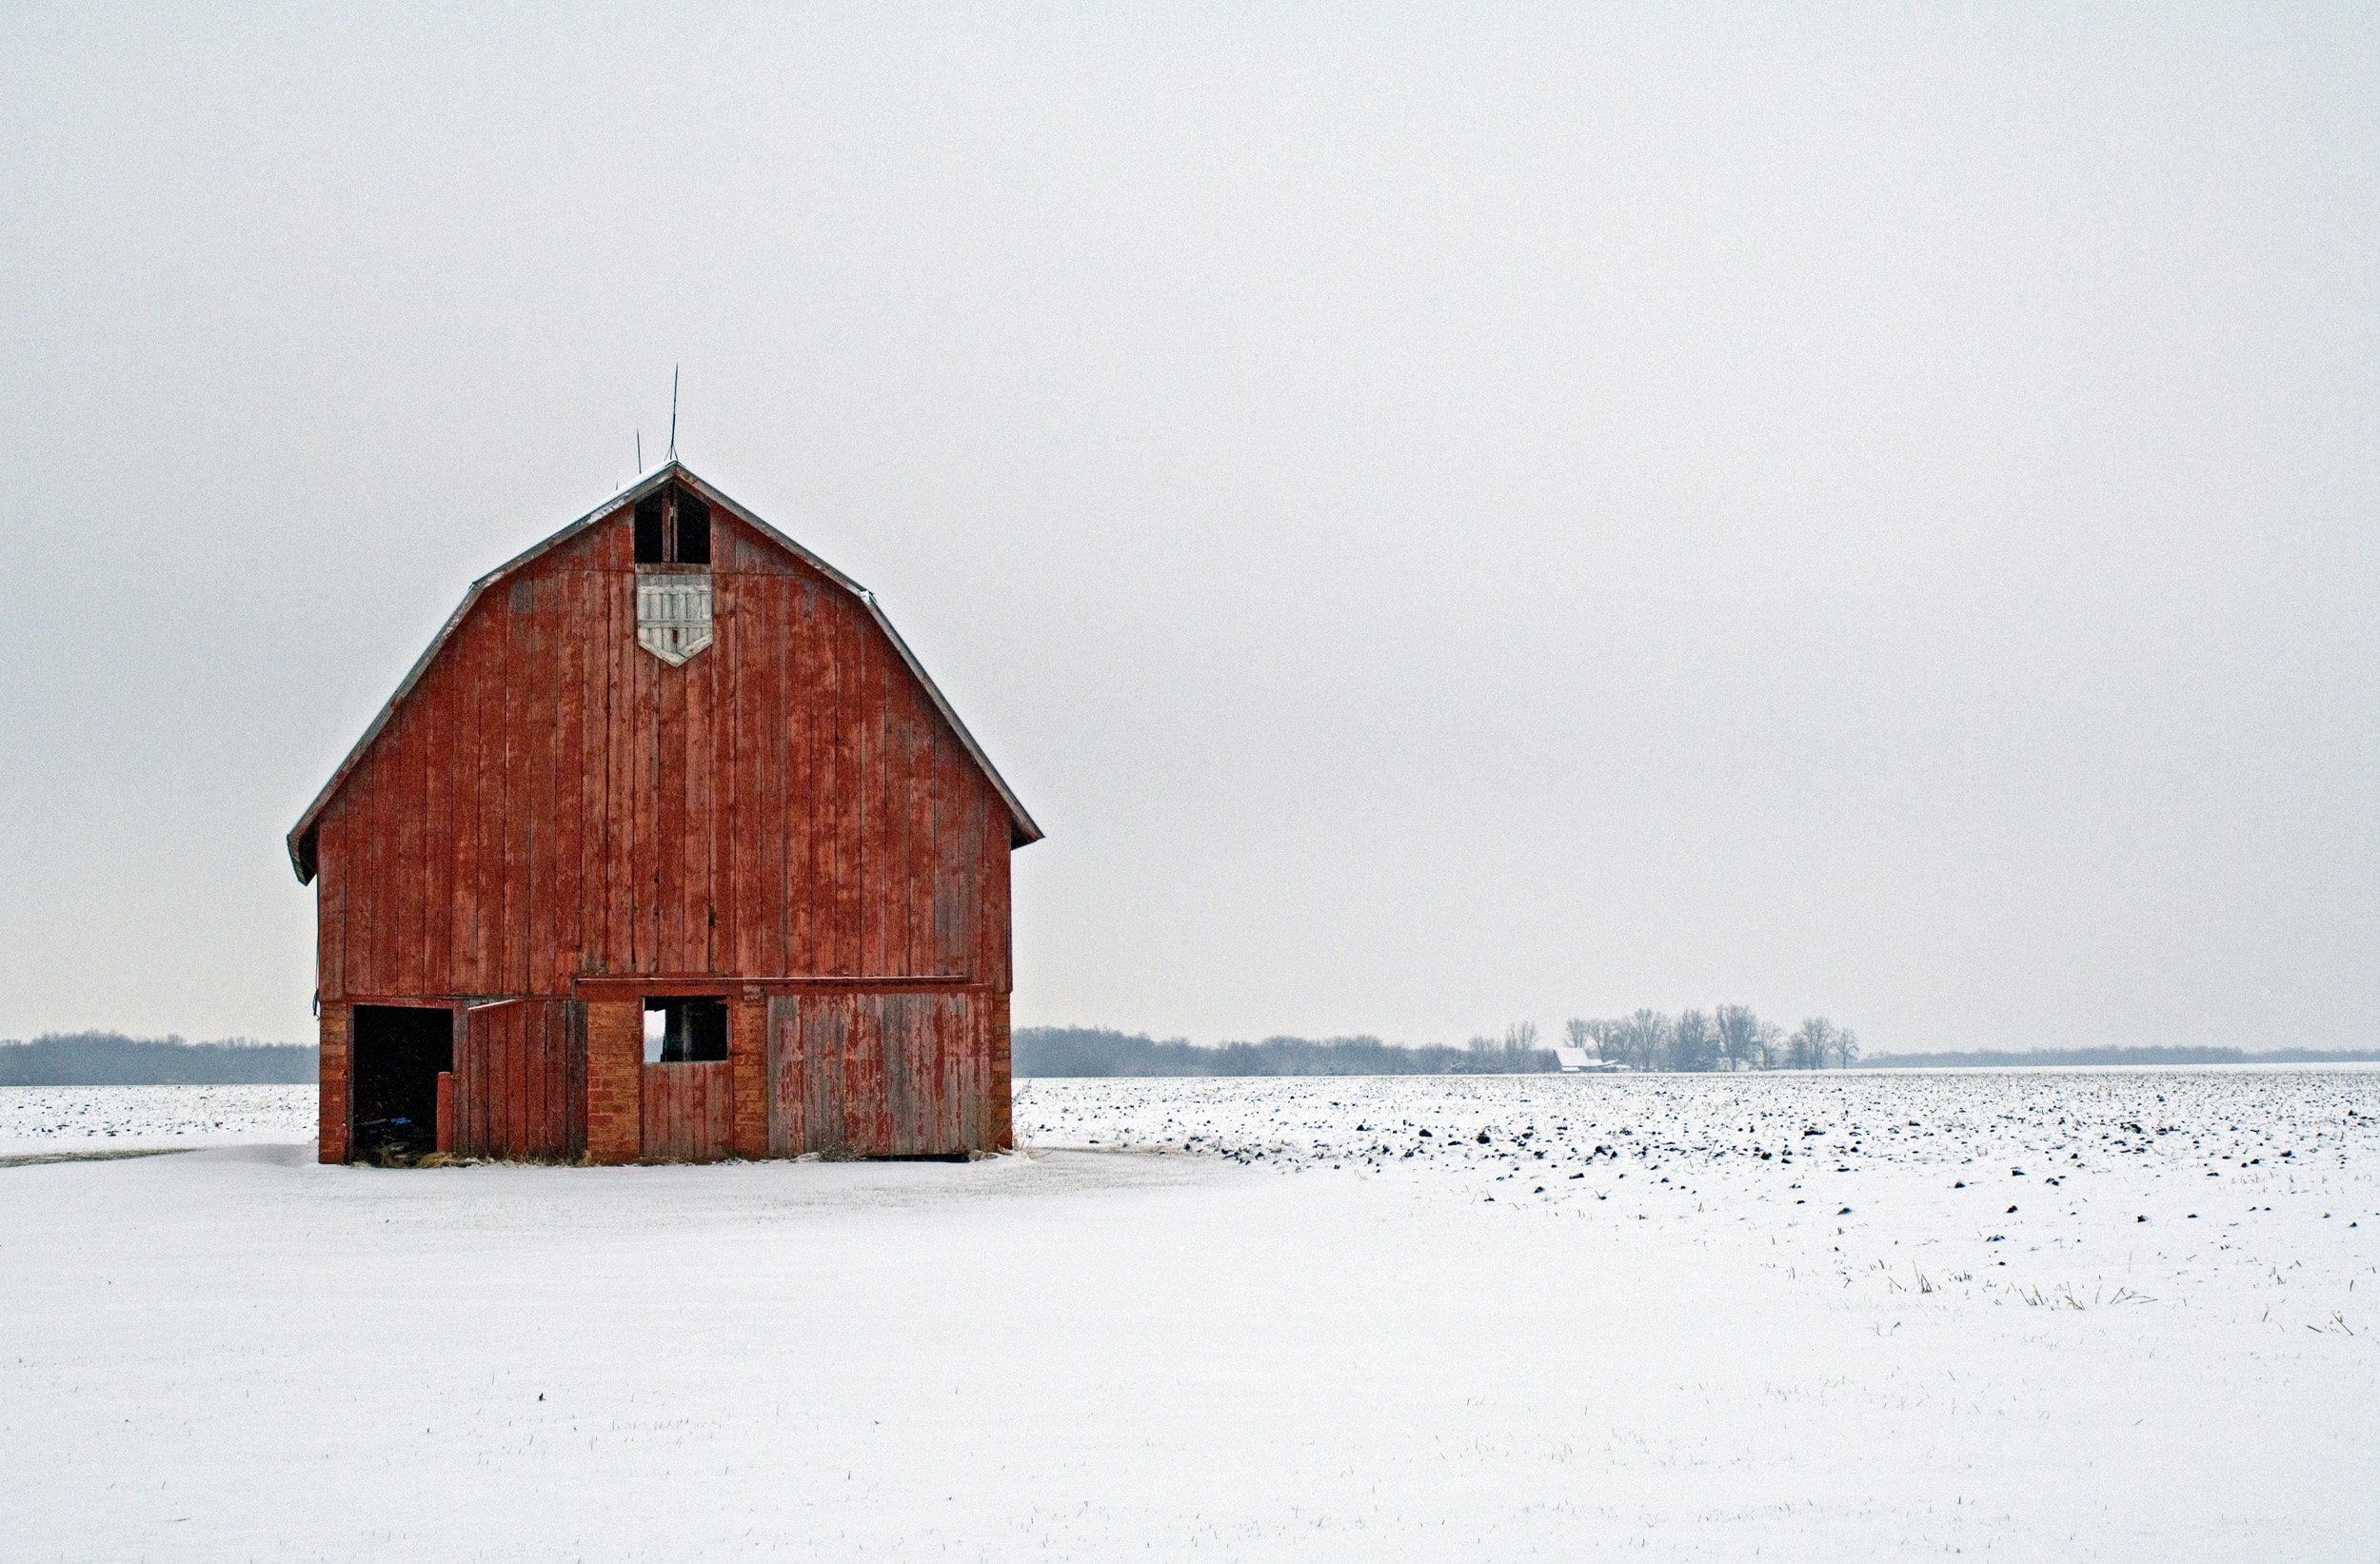  Abandoned red barn in Carthage, IL. December, 2010 